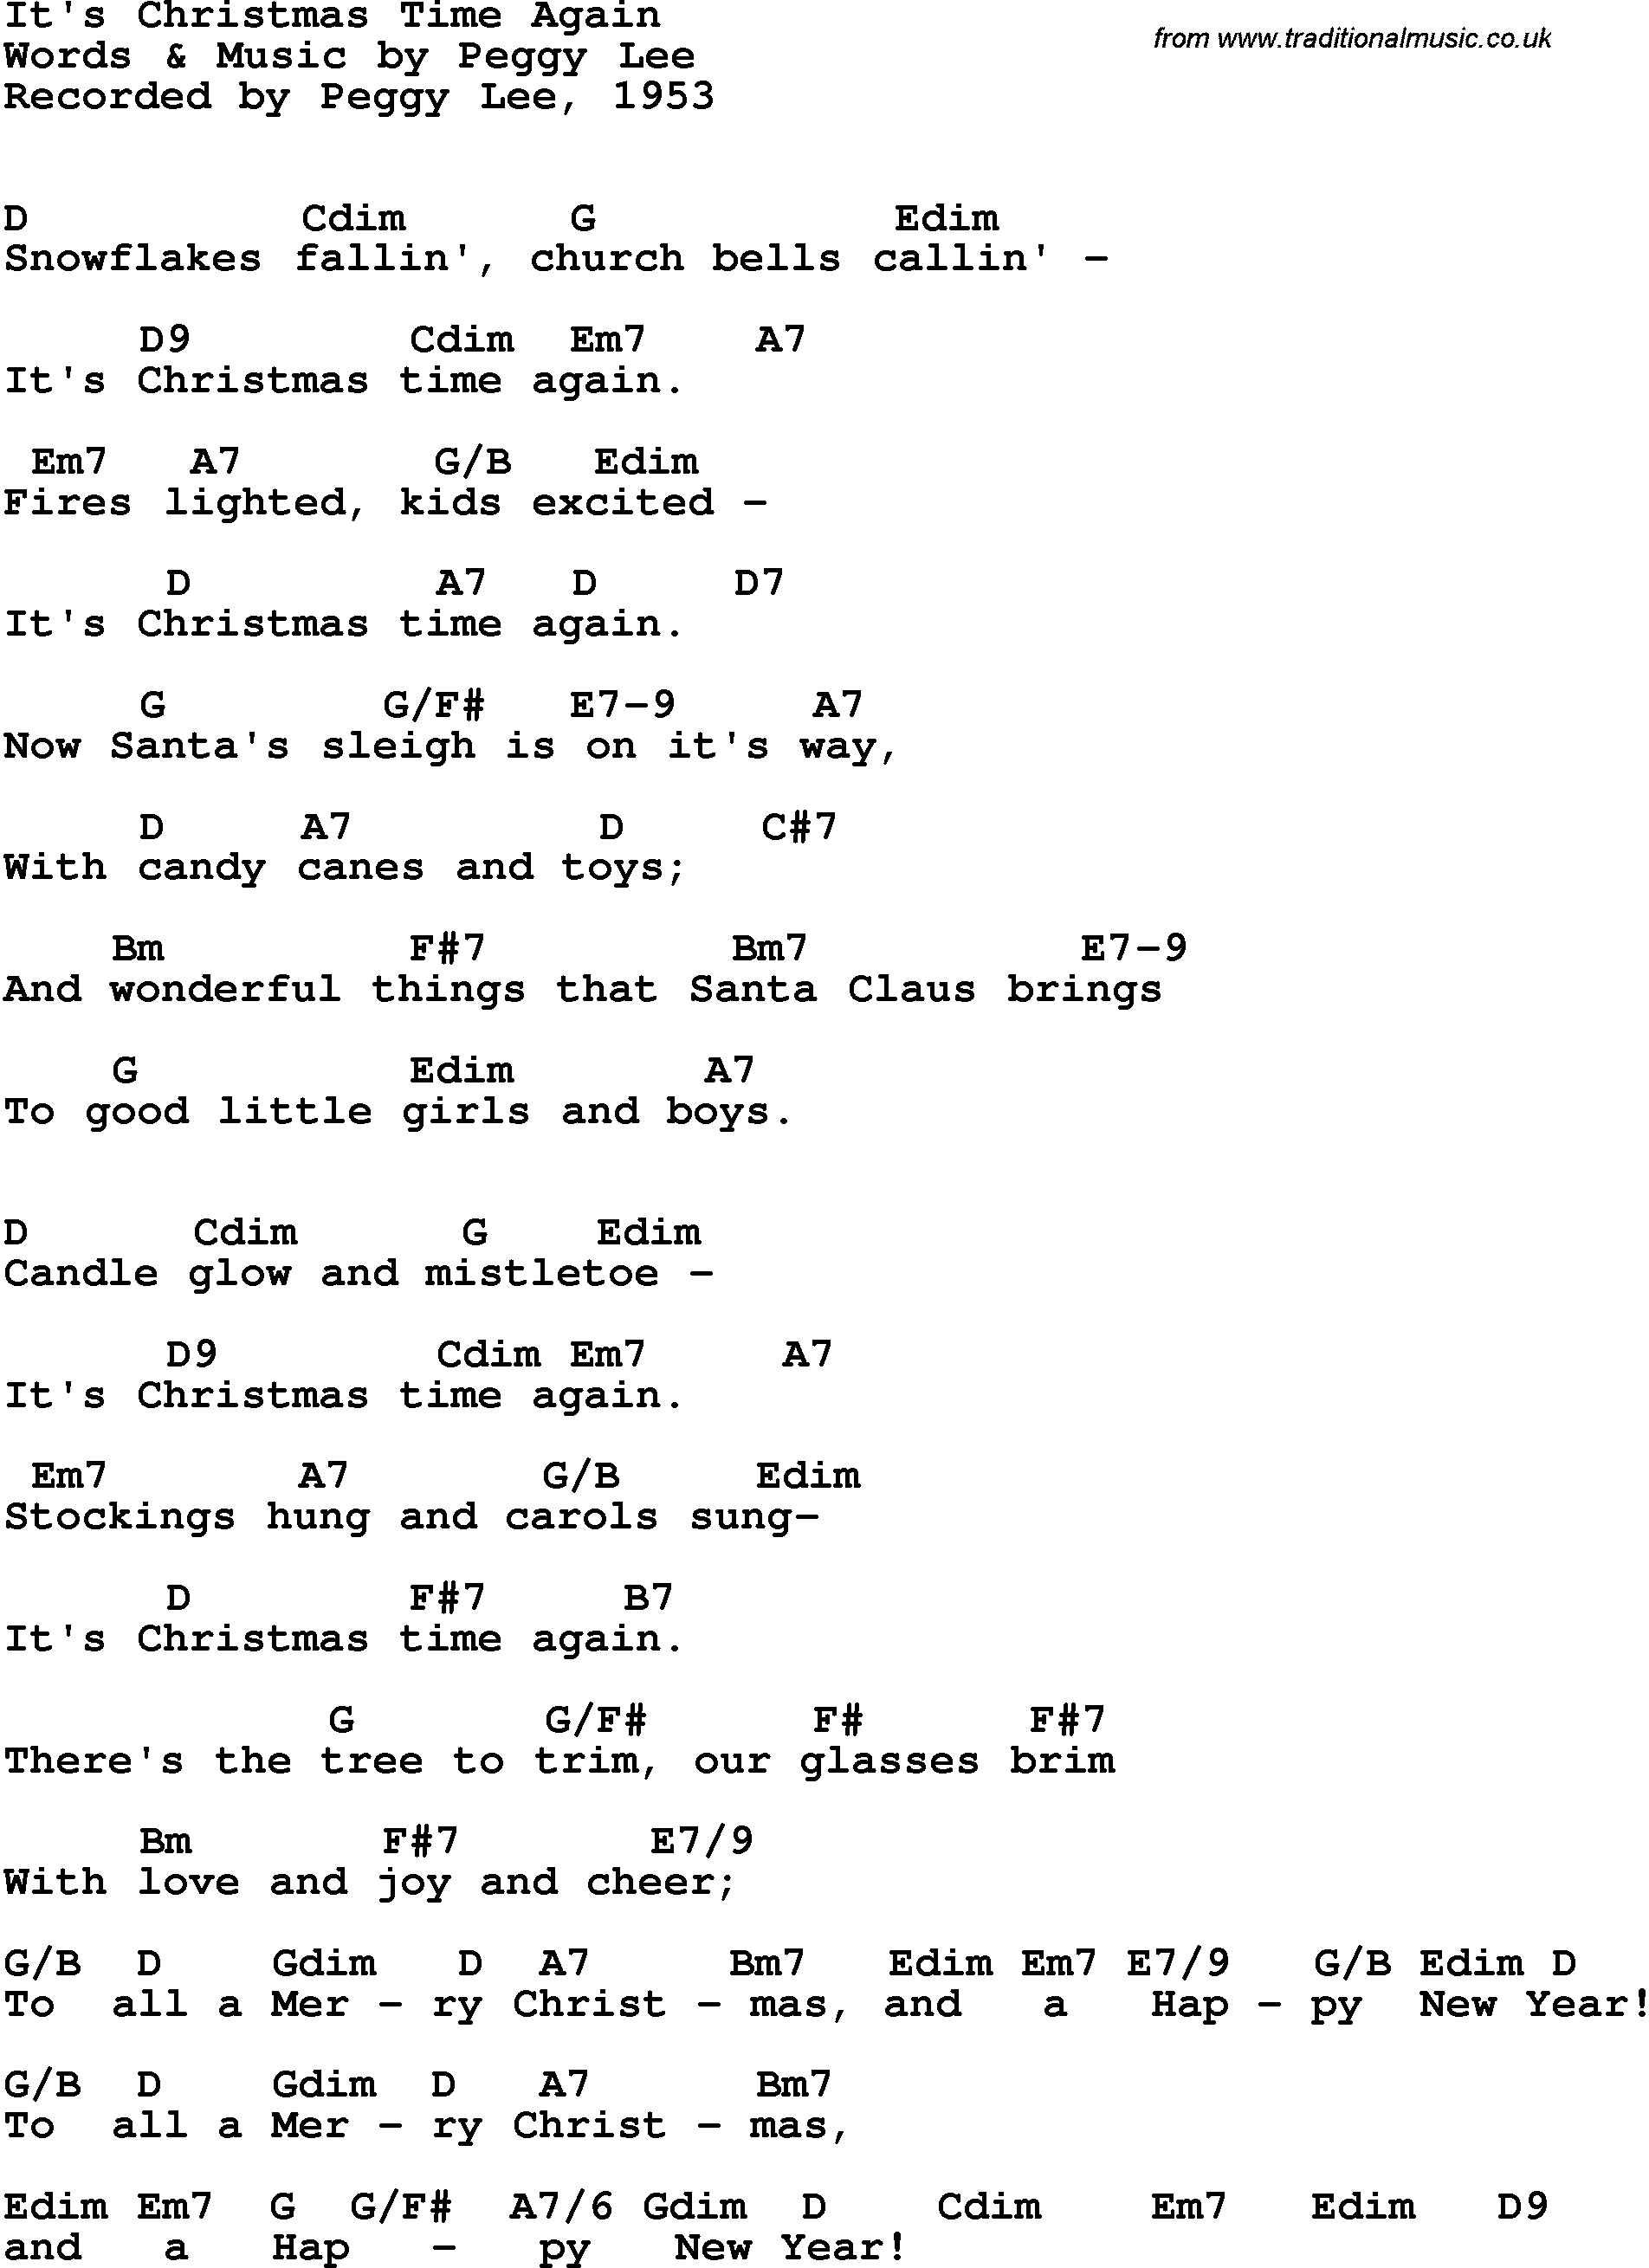 Song Lyrics with guitar chords for It's Christmas Time Again - Peggy Lee, 1953